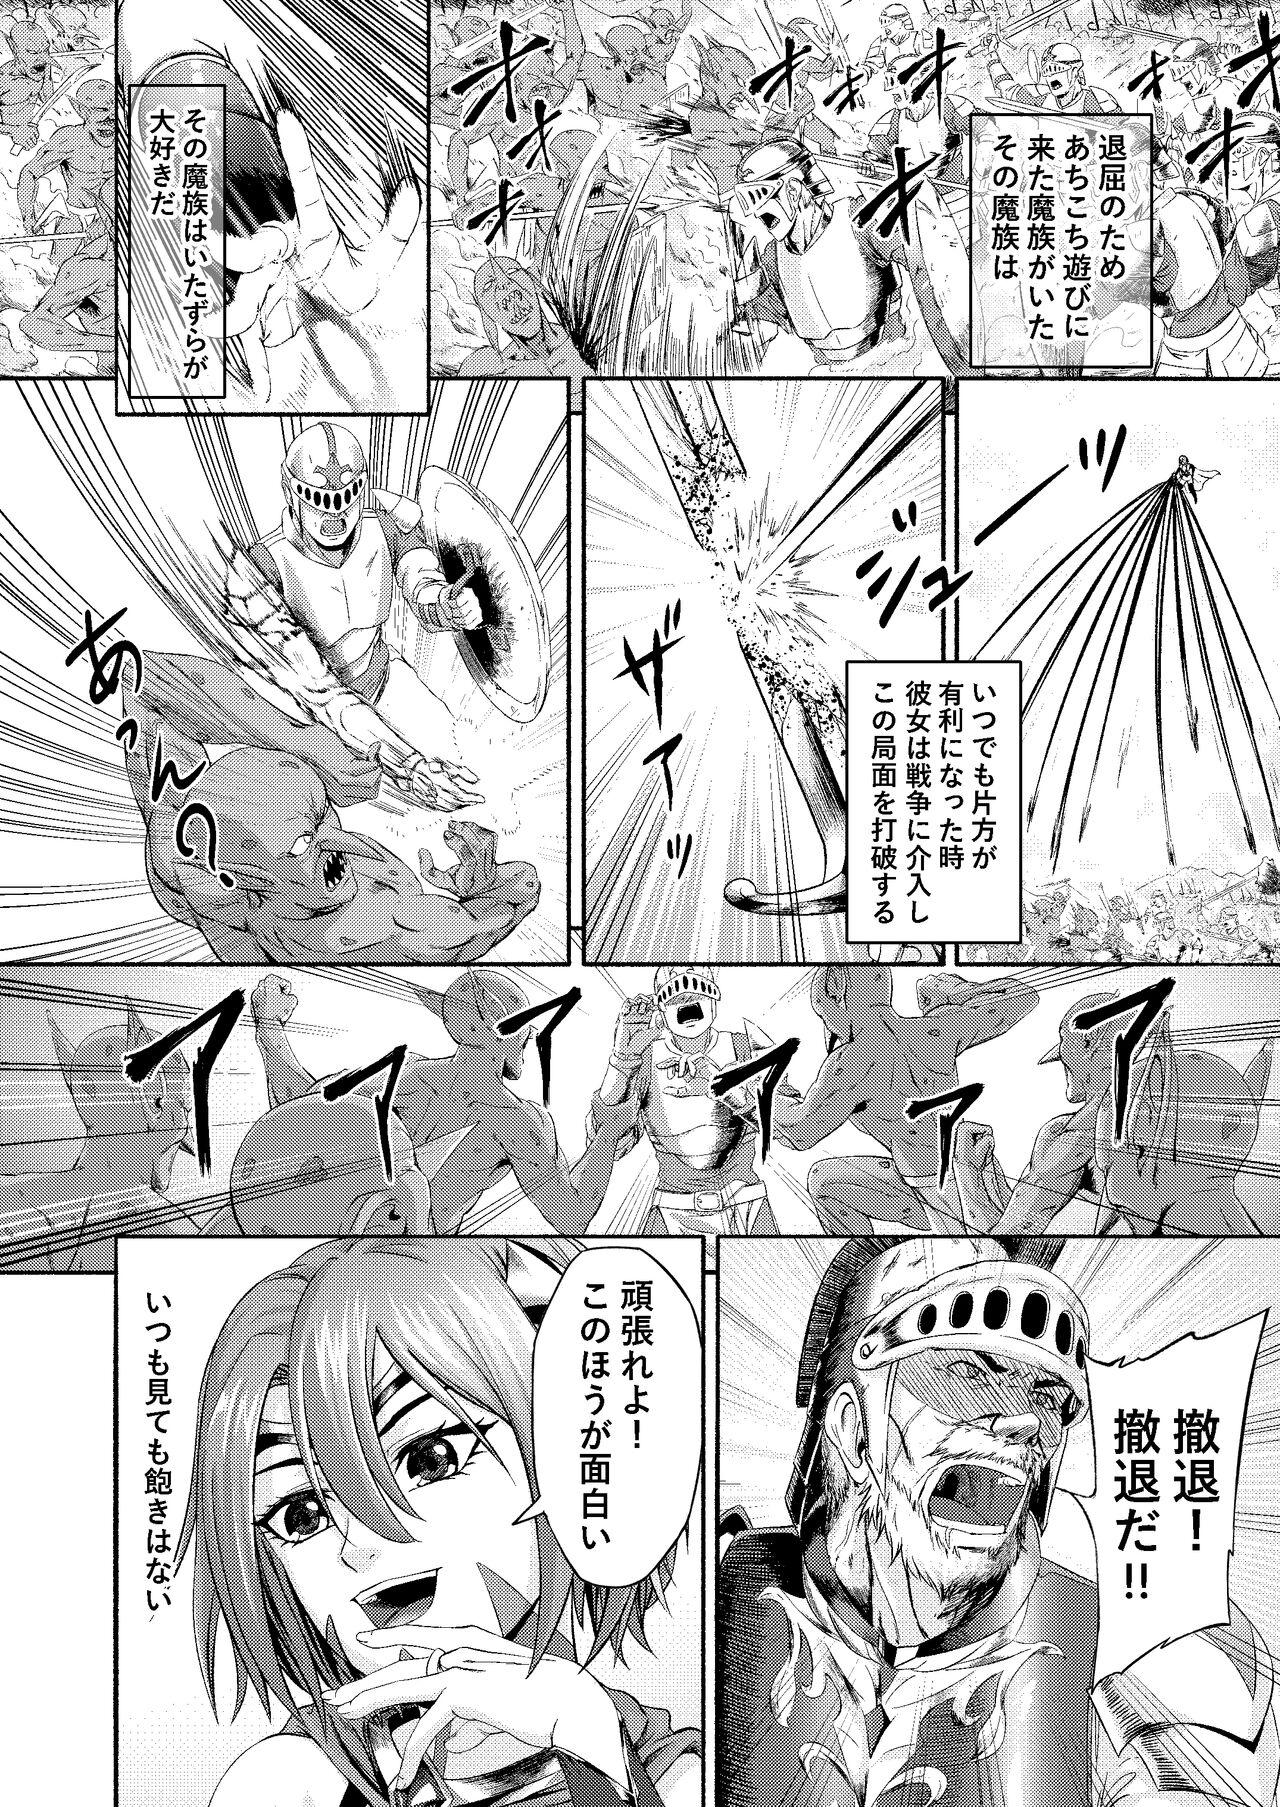 Cum Swallow Millennium Livestock-Candidate Demon King falls on Goblin Onaho Kissing - Page 4